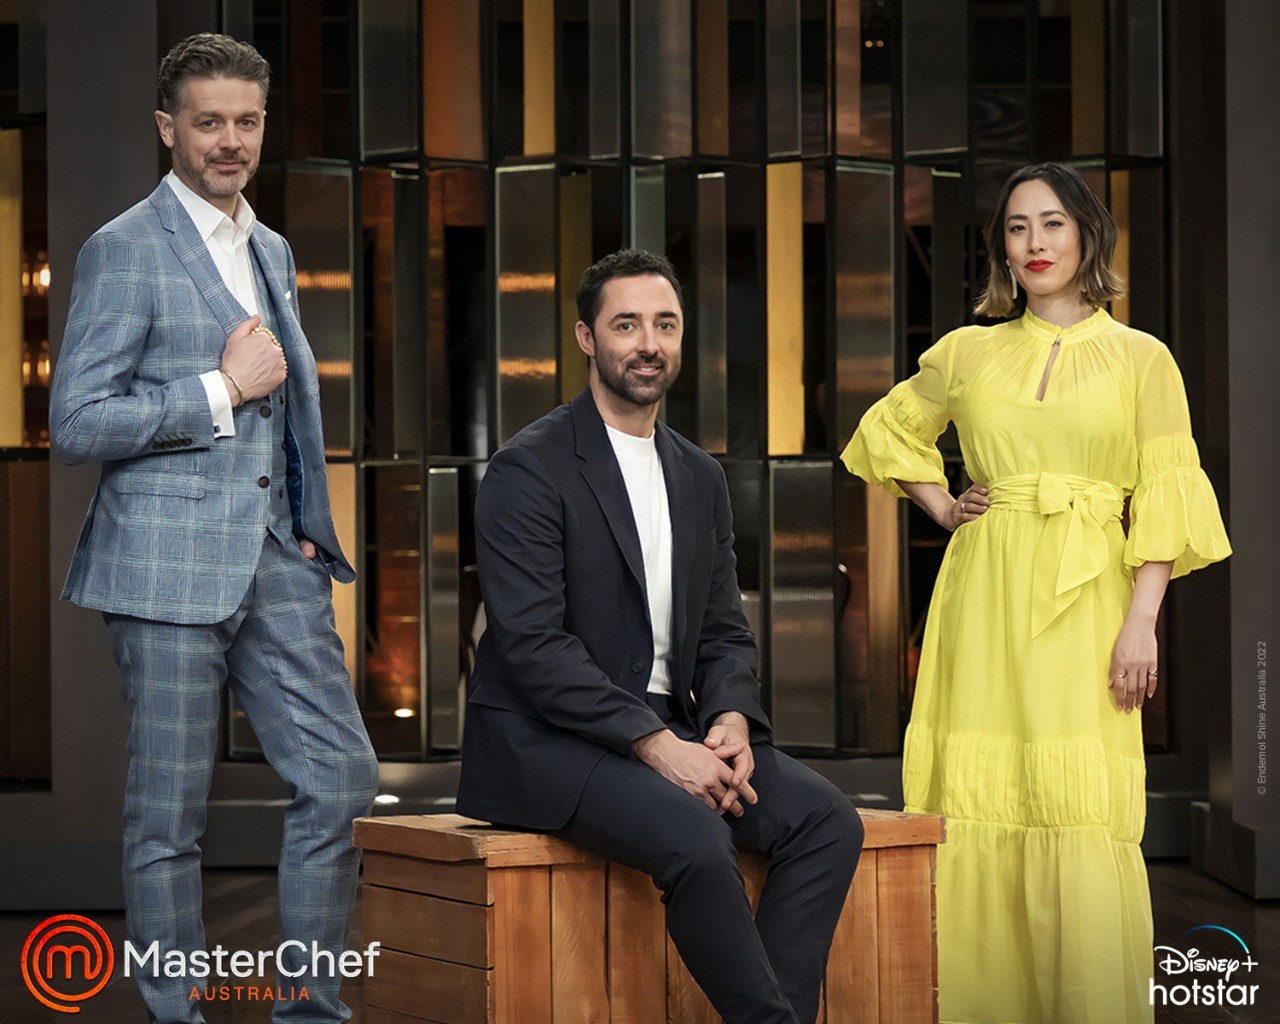 MasterChef Australia: Fans & Favourites brings the table an all-new season of culinary adventures on Disney+ Hotstar from 19 April -